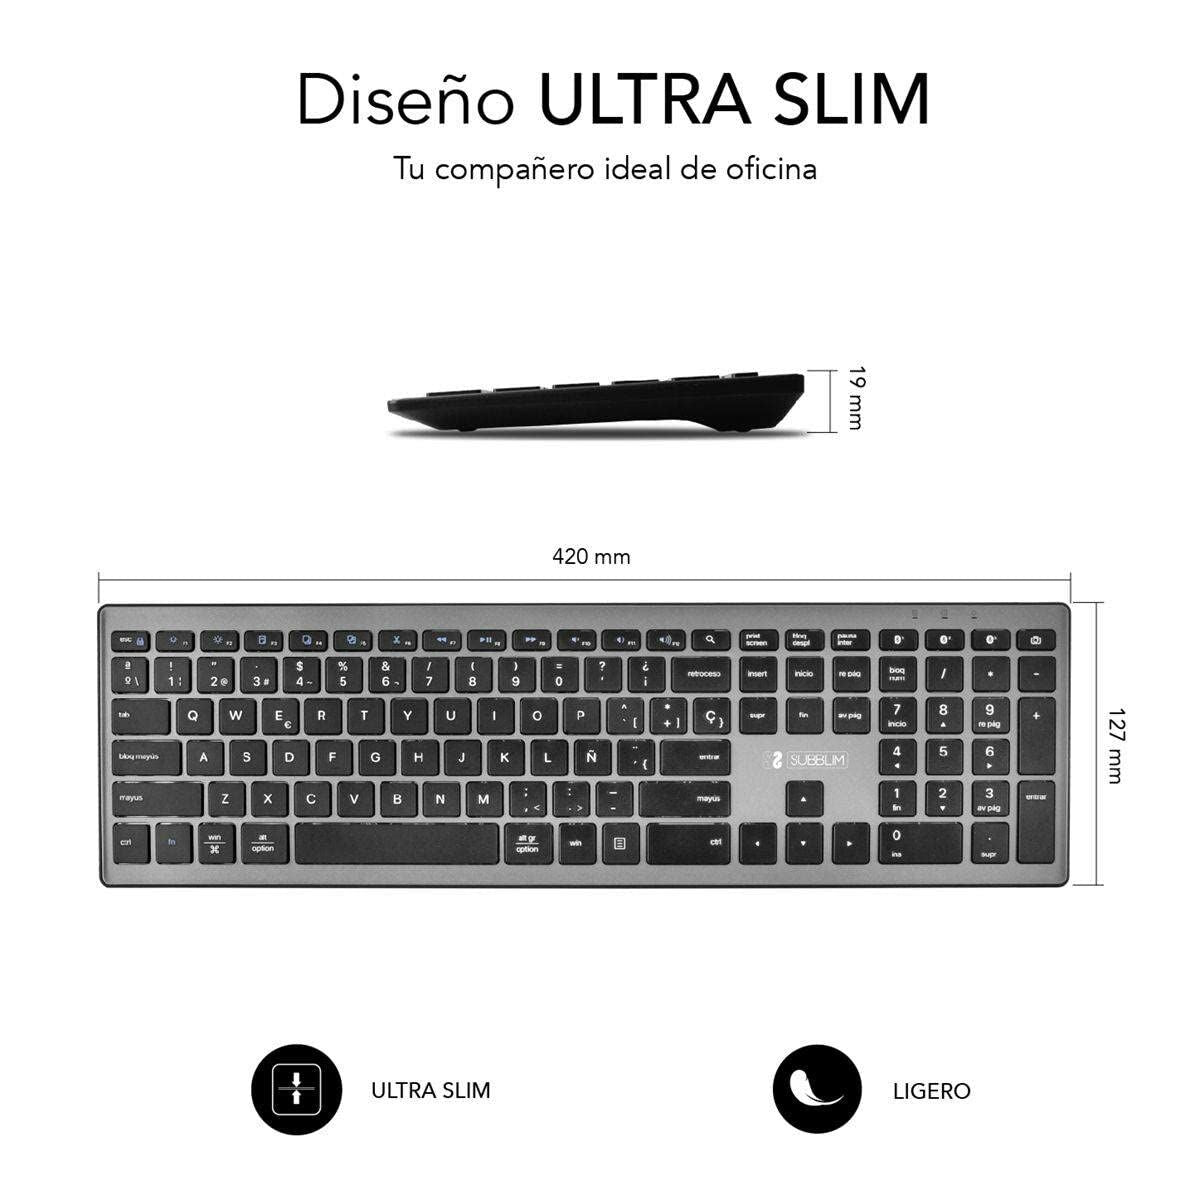 Keyboard Subblim SUBKB-2PUE201 Black, Subblim, Computing, Accessories, keyboard-subblim-subkb-2pue201-black, :QWERTY, :Spanish, Brand_Subblim, category-reference-2609, category-reference-2642, category-reference-2646, category-reference-t-19685, category-reference-t-19908, category-reference-t-21353, computers / peripherals, Condition_NEW, office, Price_20 - 50, Teleworking, RiotNook